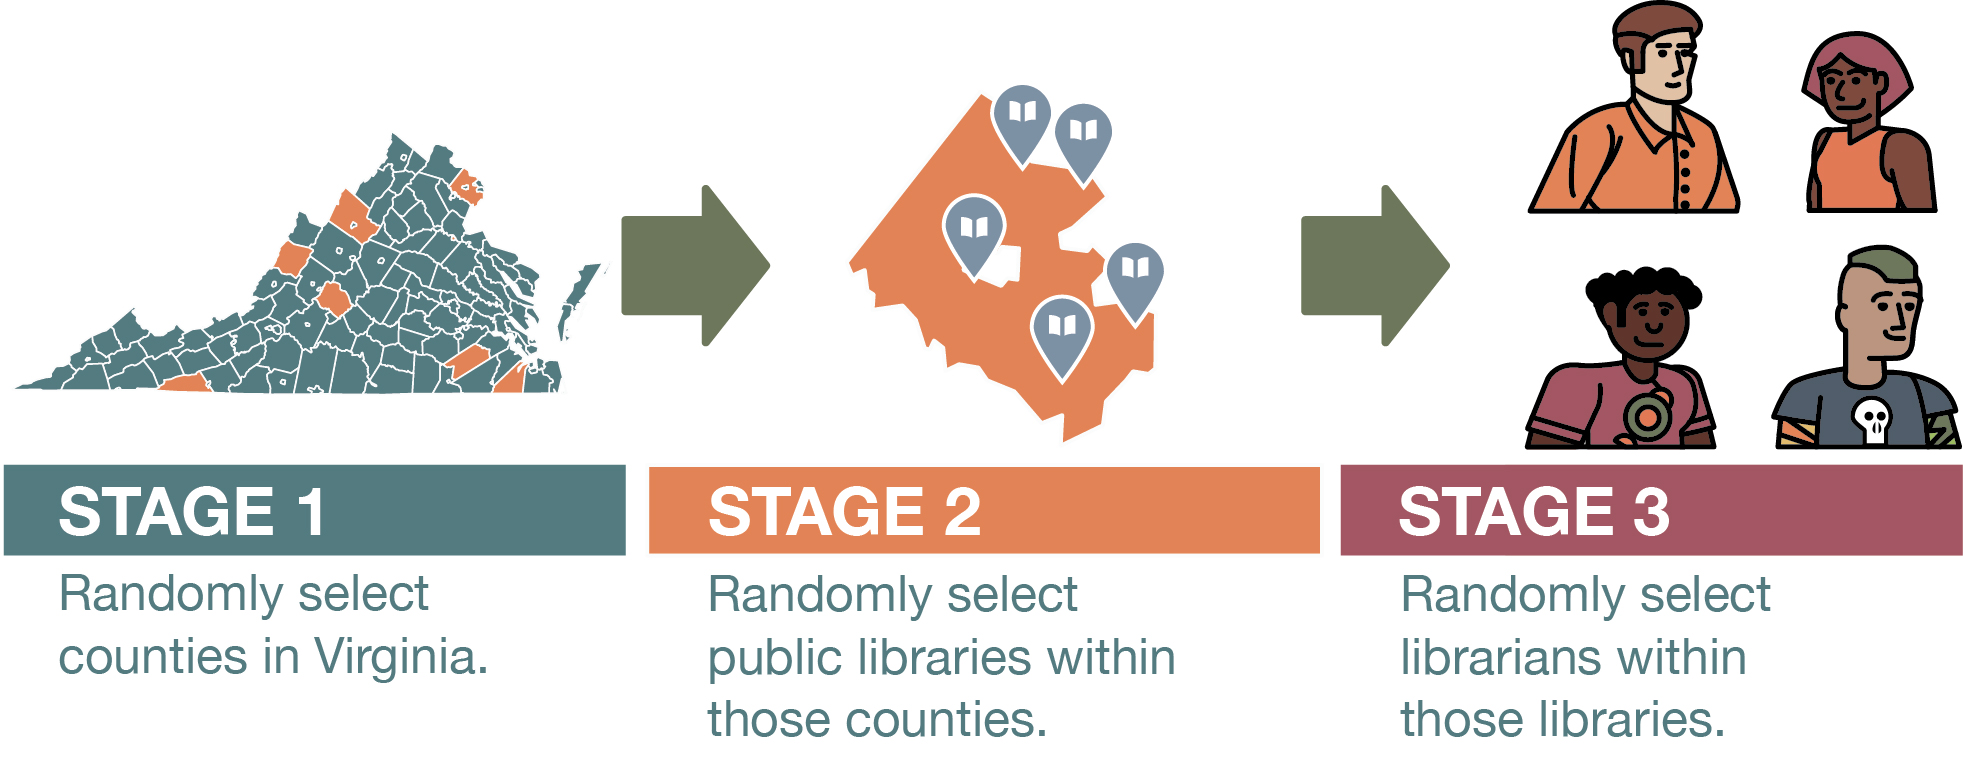 An image that shows the three stages to conduct cluster sampling of public librarians in Virginia.